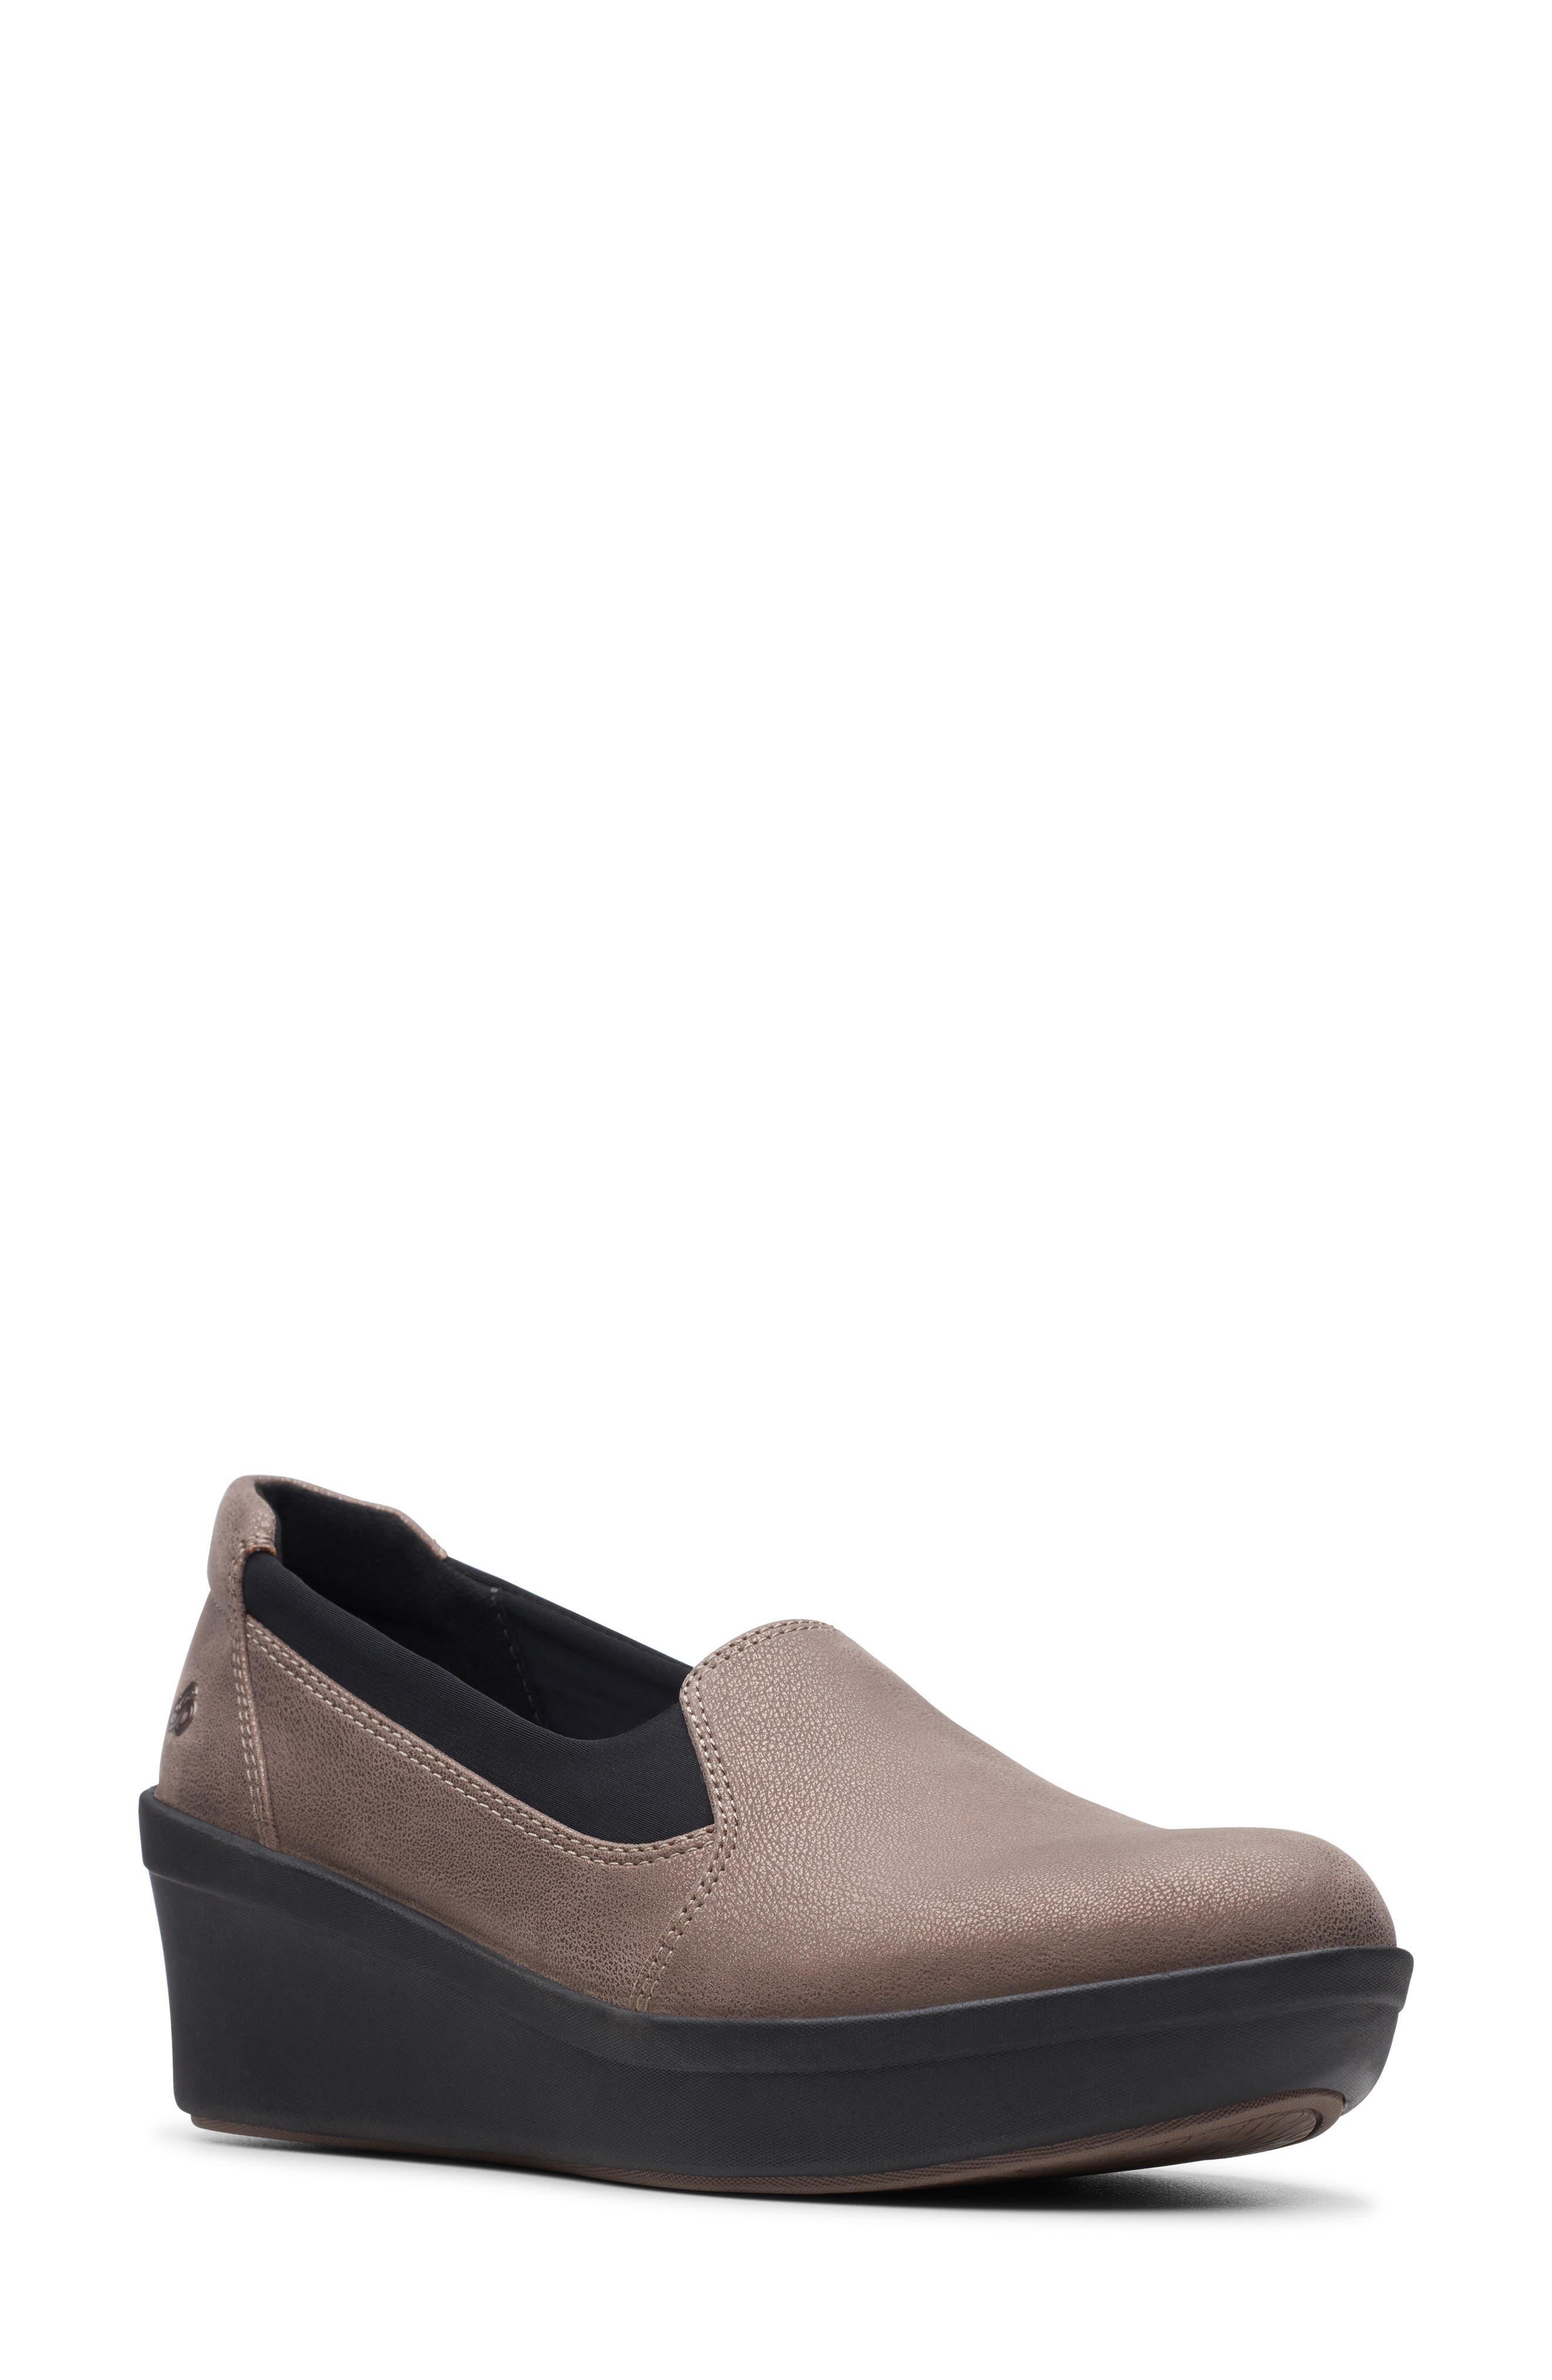 clarks wedge dress shoes